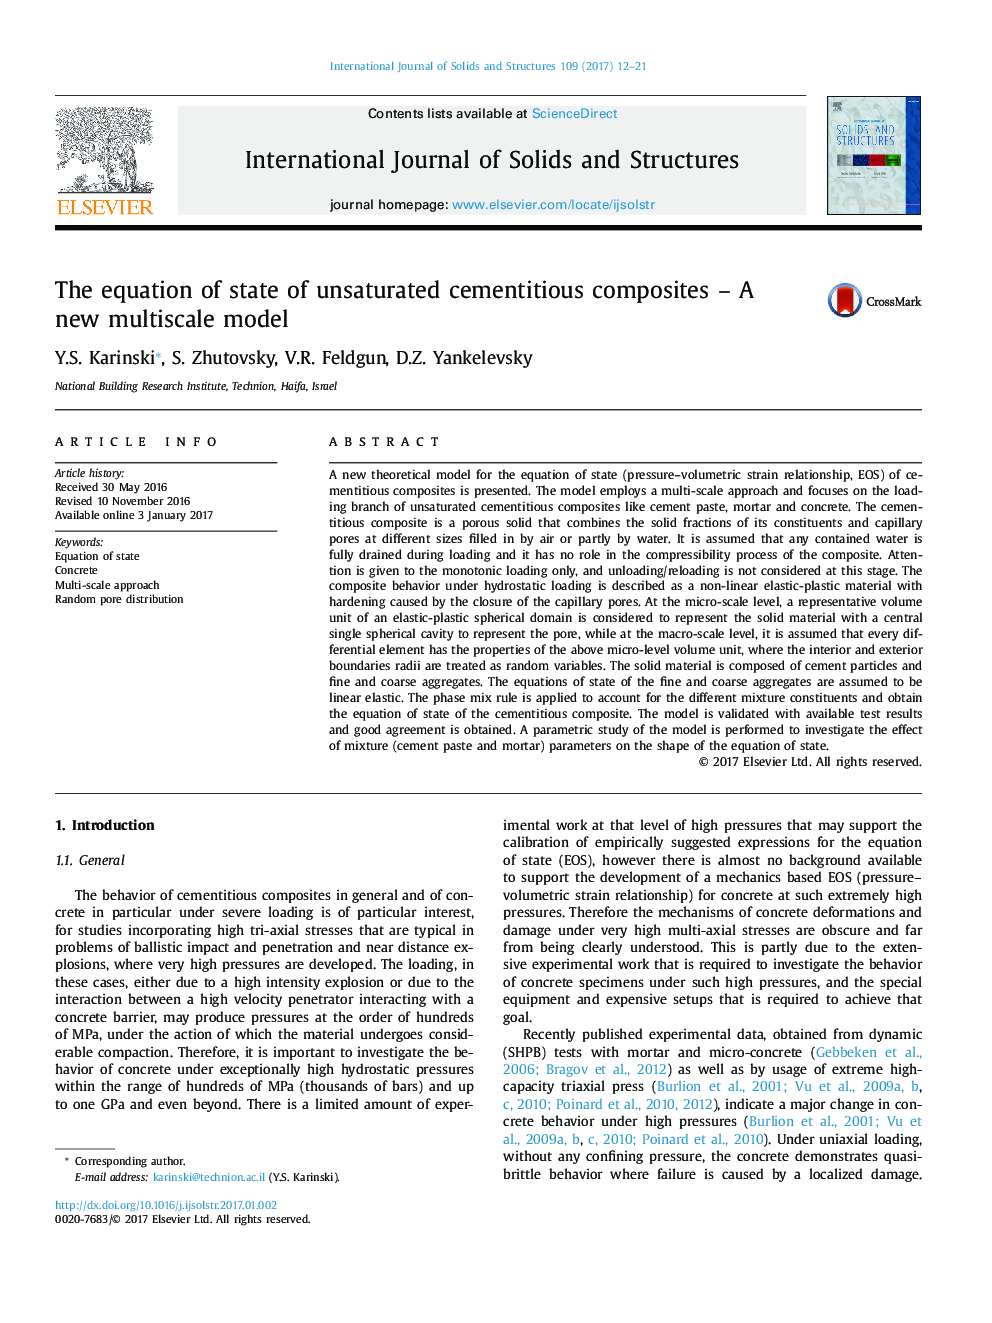 The equation of state of unsaturated cementitious composites - A new multiscale model
